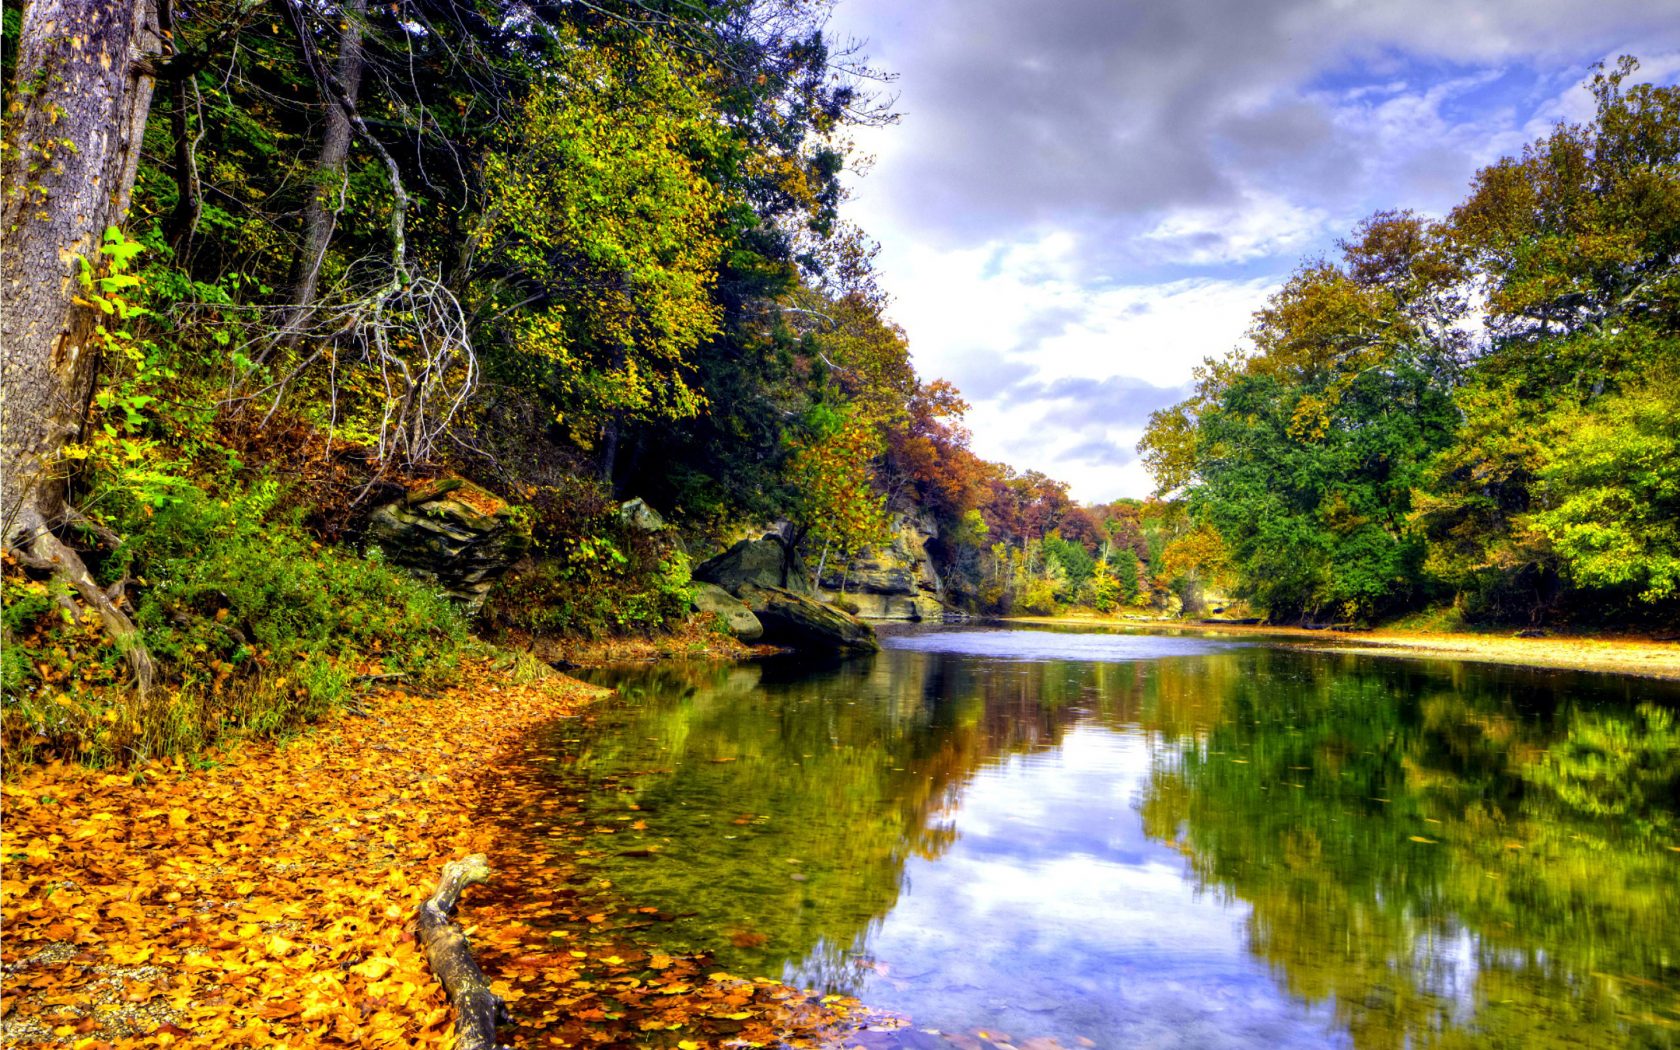 Landscape Autumn Mountain River Mirna Deciduous Forest In Autumn Colors Yellow Fallen Leaves Coast With Rocks And Tree Enclosed Sky With Gray Clouds Wallpaper HD 2880x1800, Wallpaper13.com